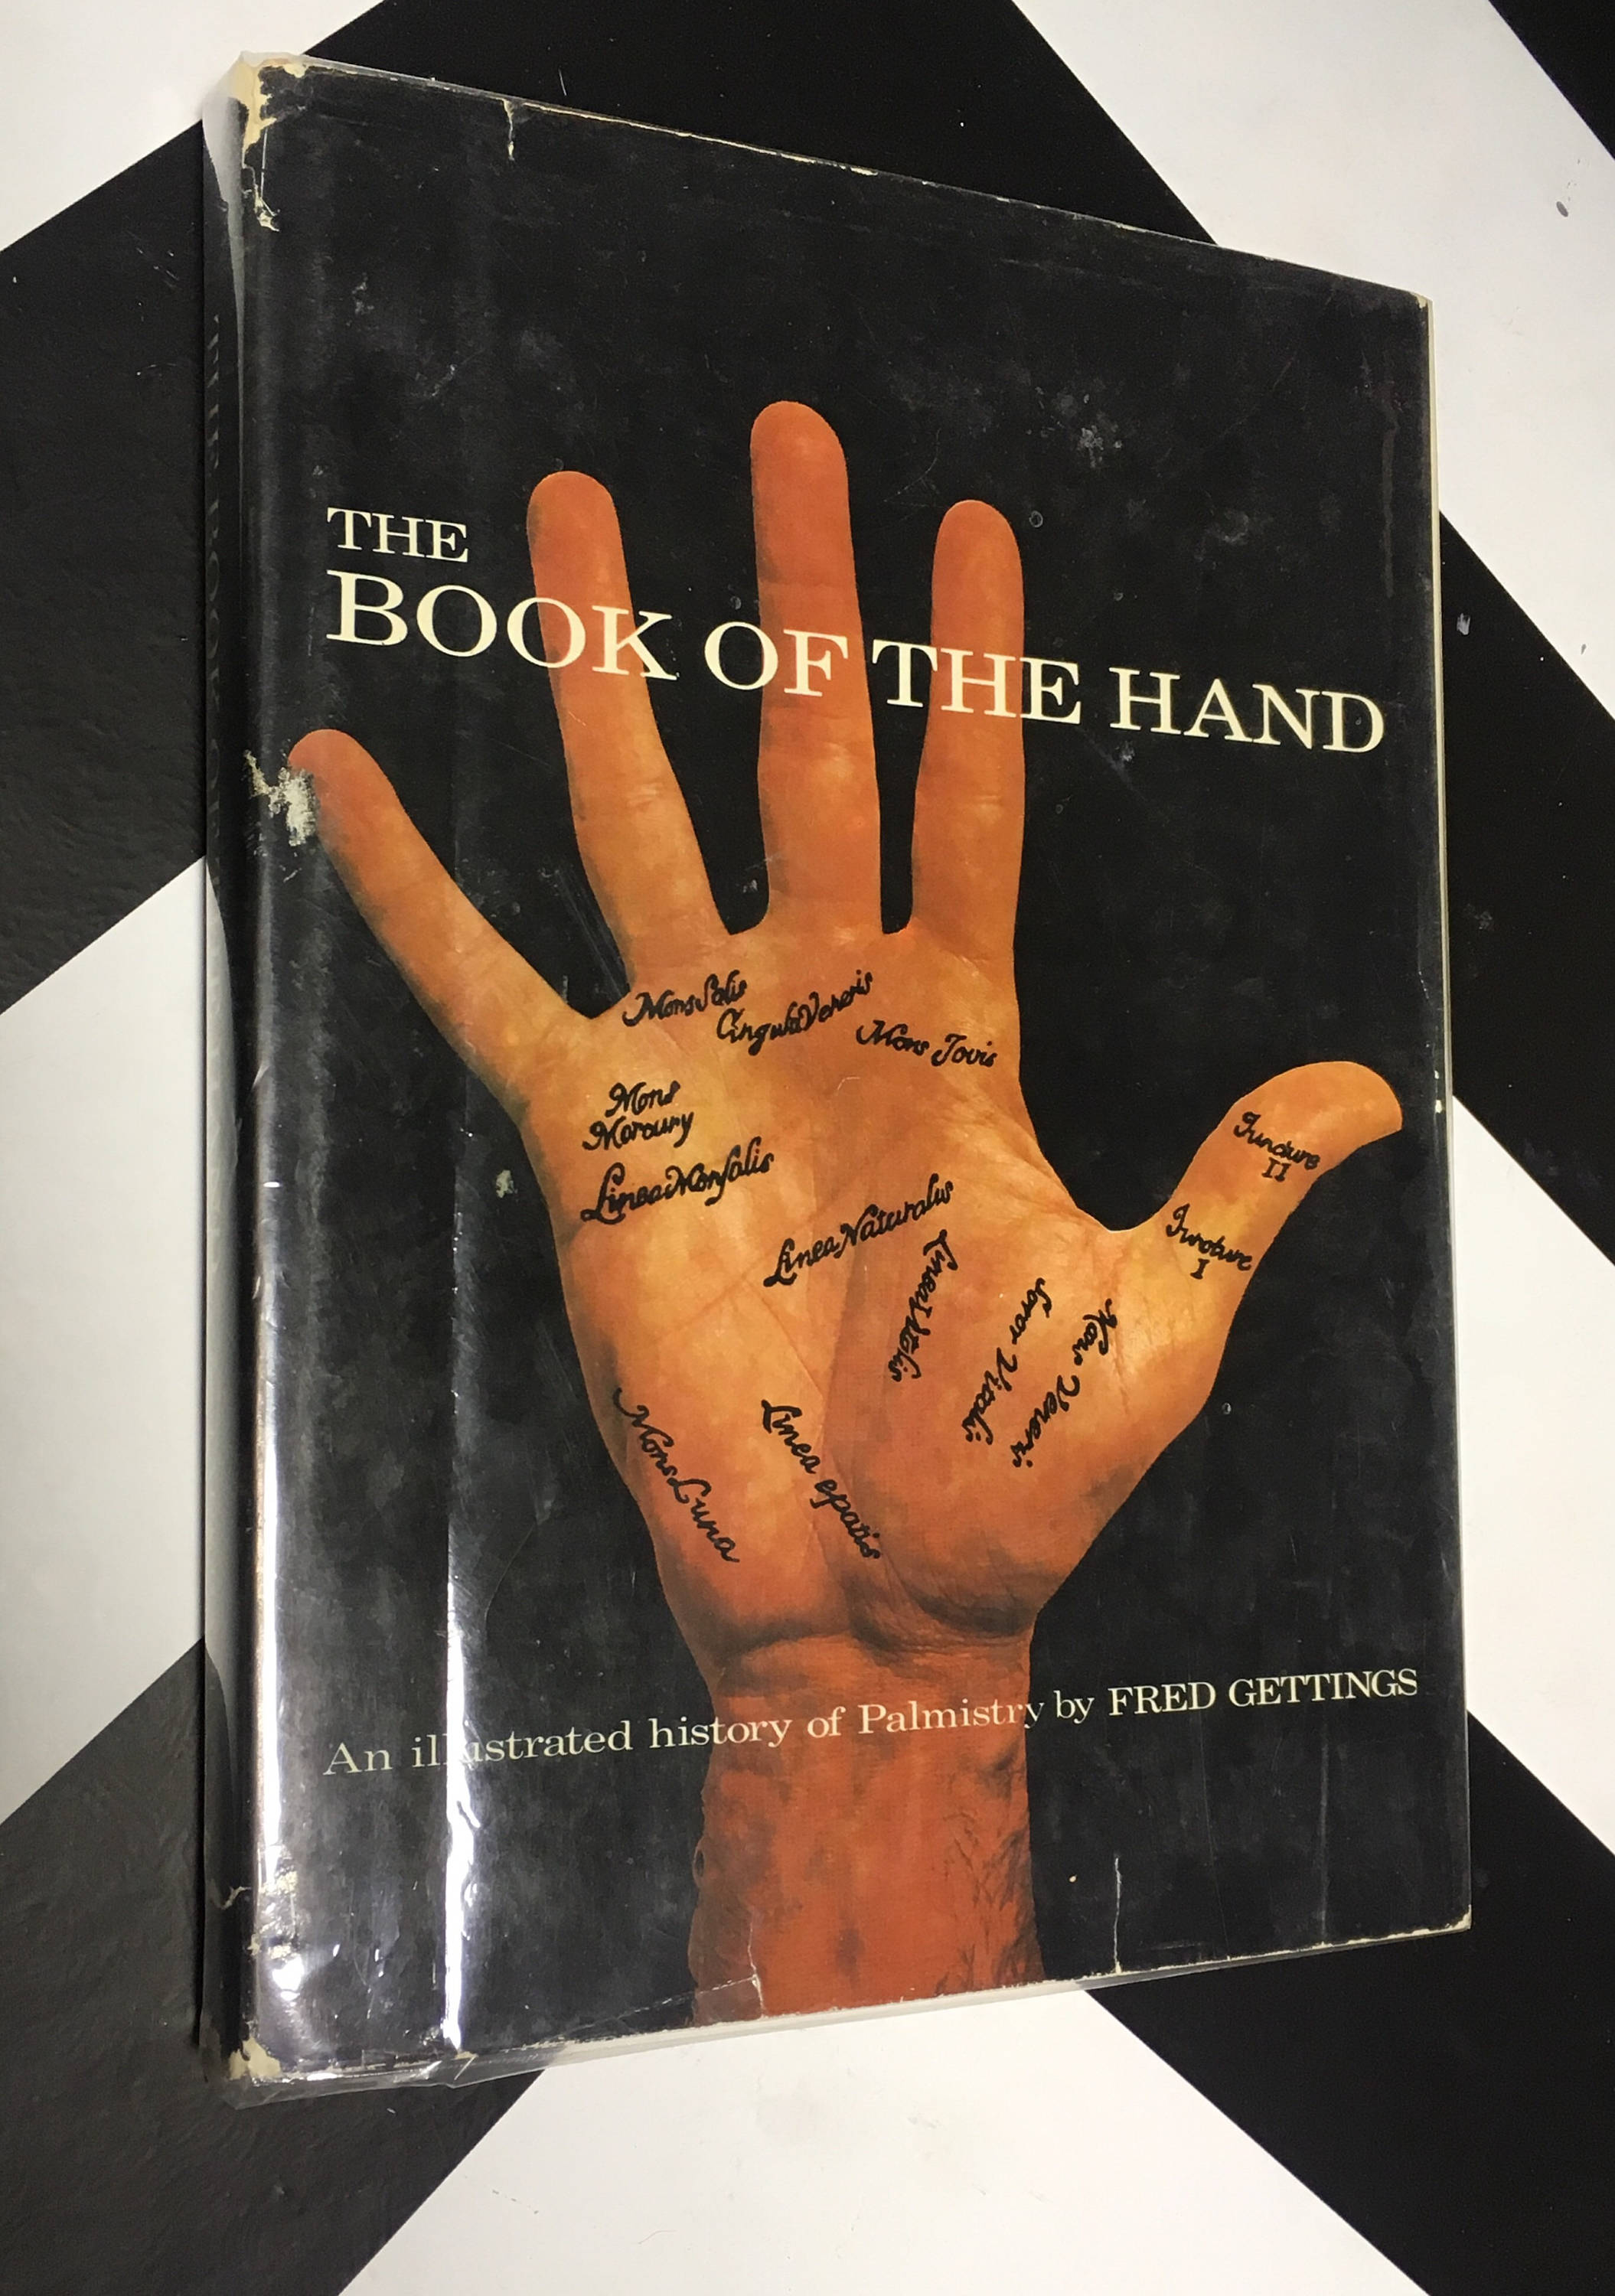 a hand book of essays